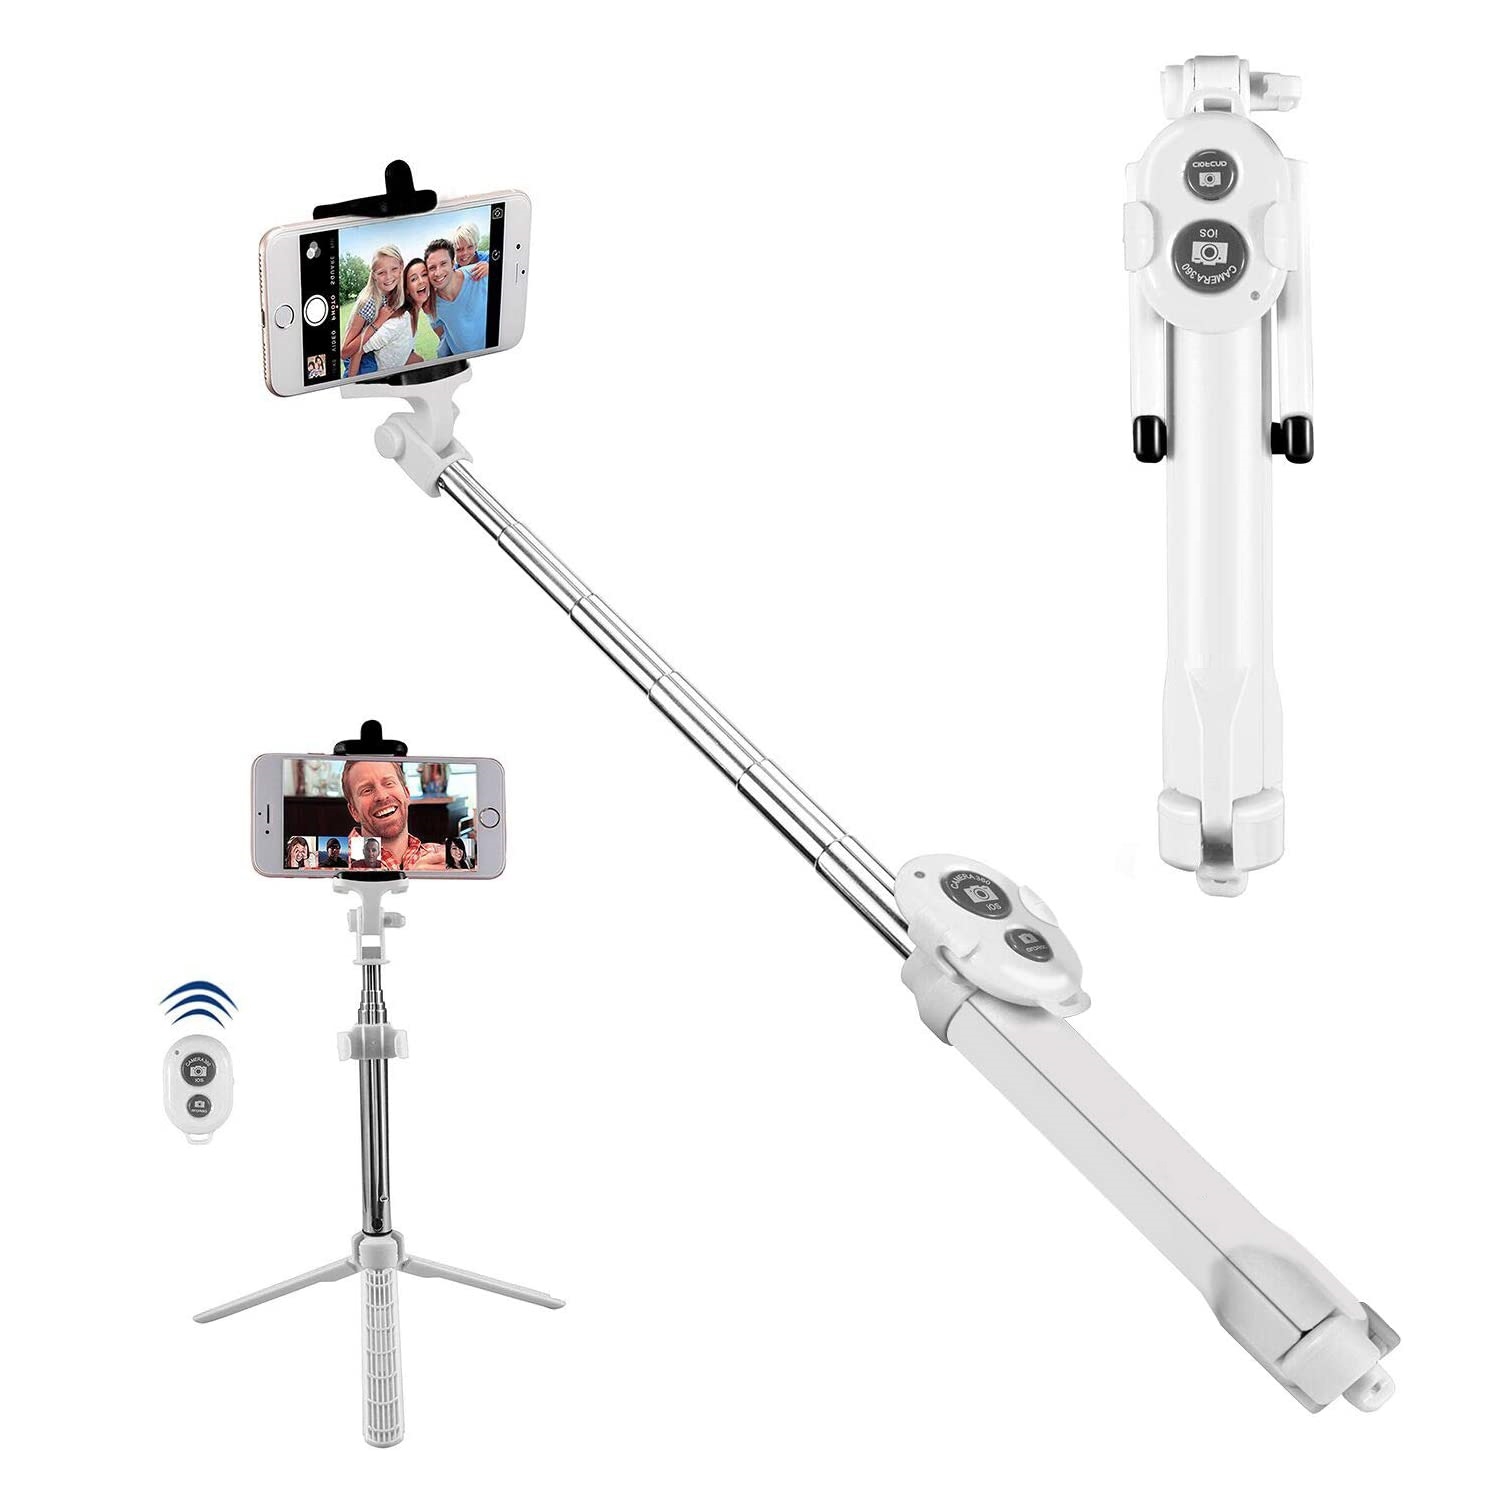 ISTAR Bluetooth Selfie Stick with Tripod & Wireless Remote for iPhone 12/12 Pro/11/11 Pro/XS Max/XS/XR, Galaxy S20/S10/S9, Huawei & More